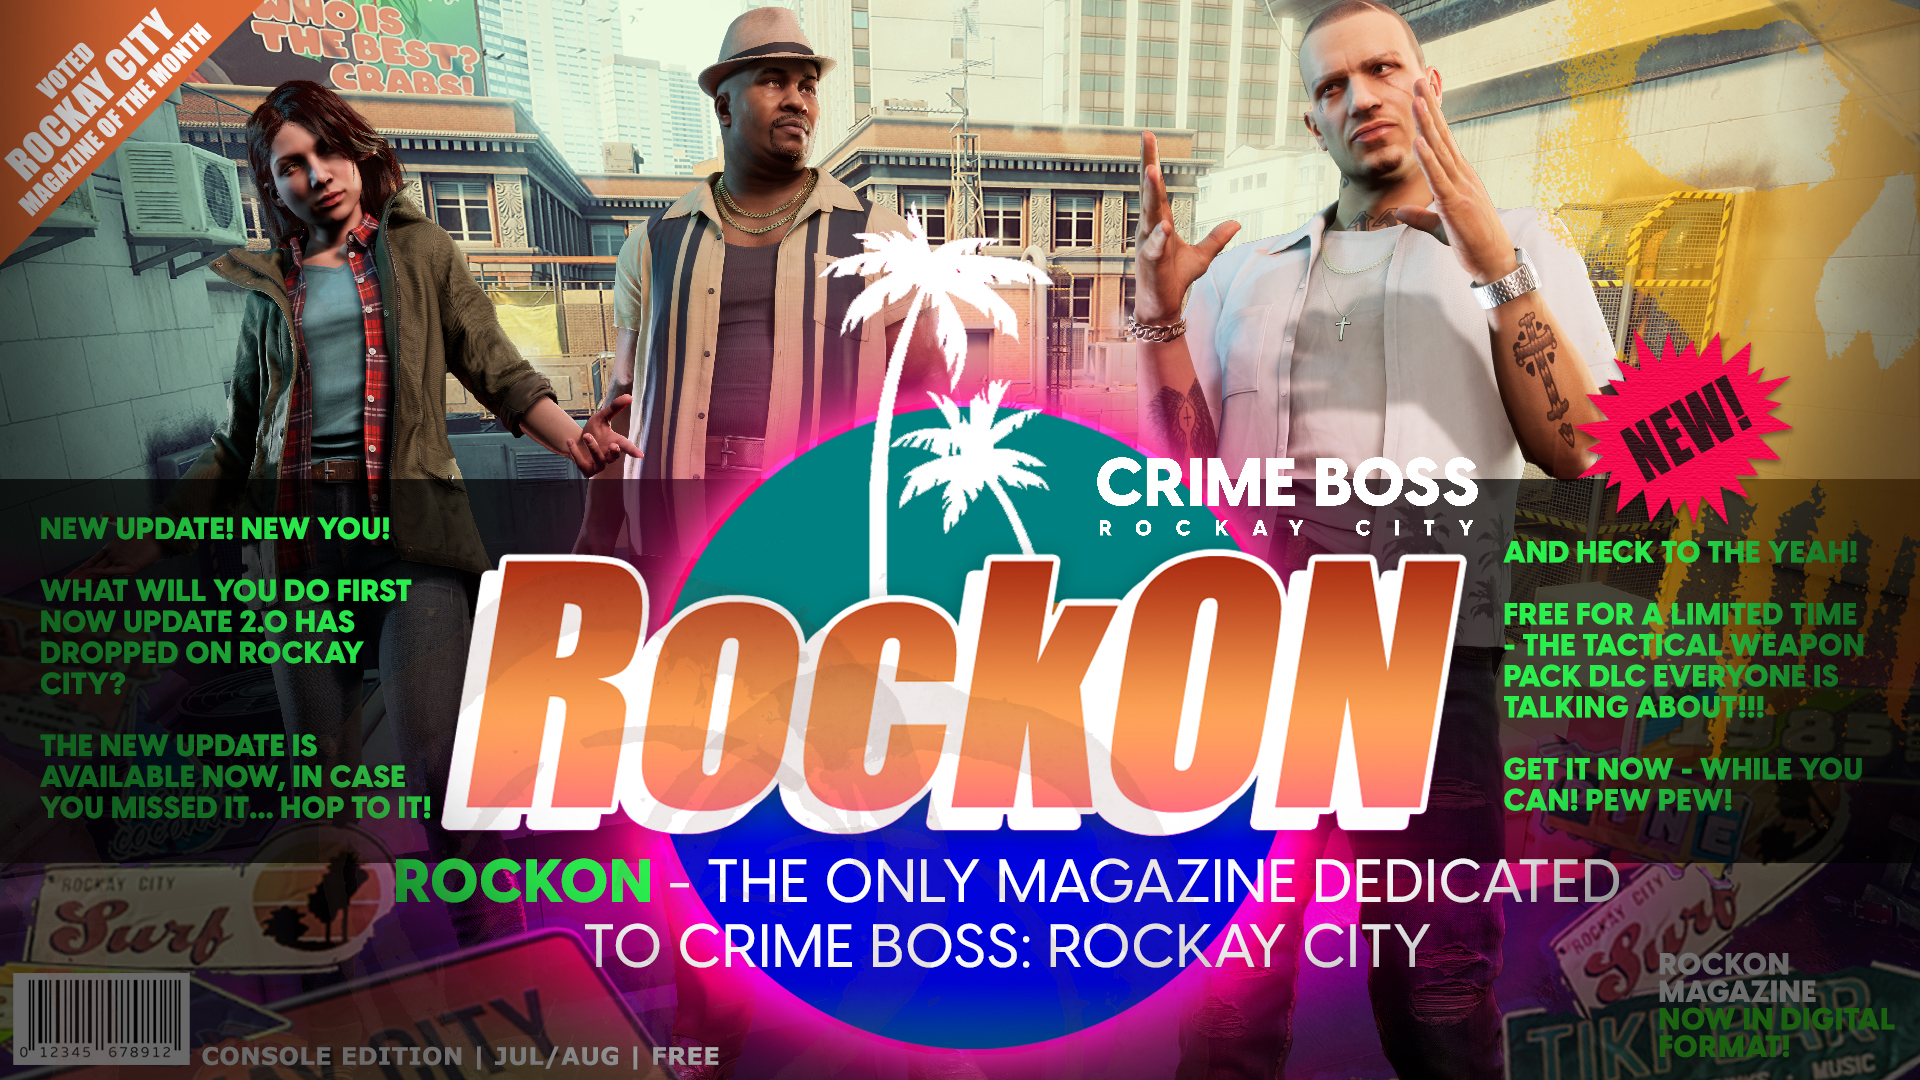 RockON Magazine – ON A DOUBLE DATE WITH AN UPDATE!